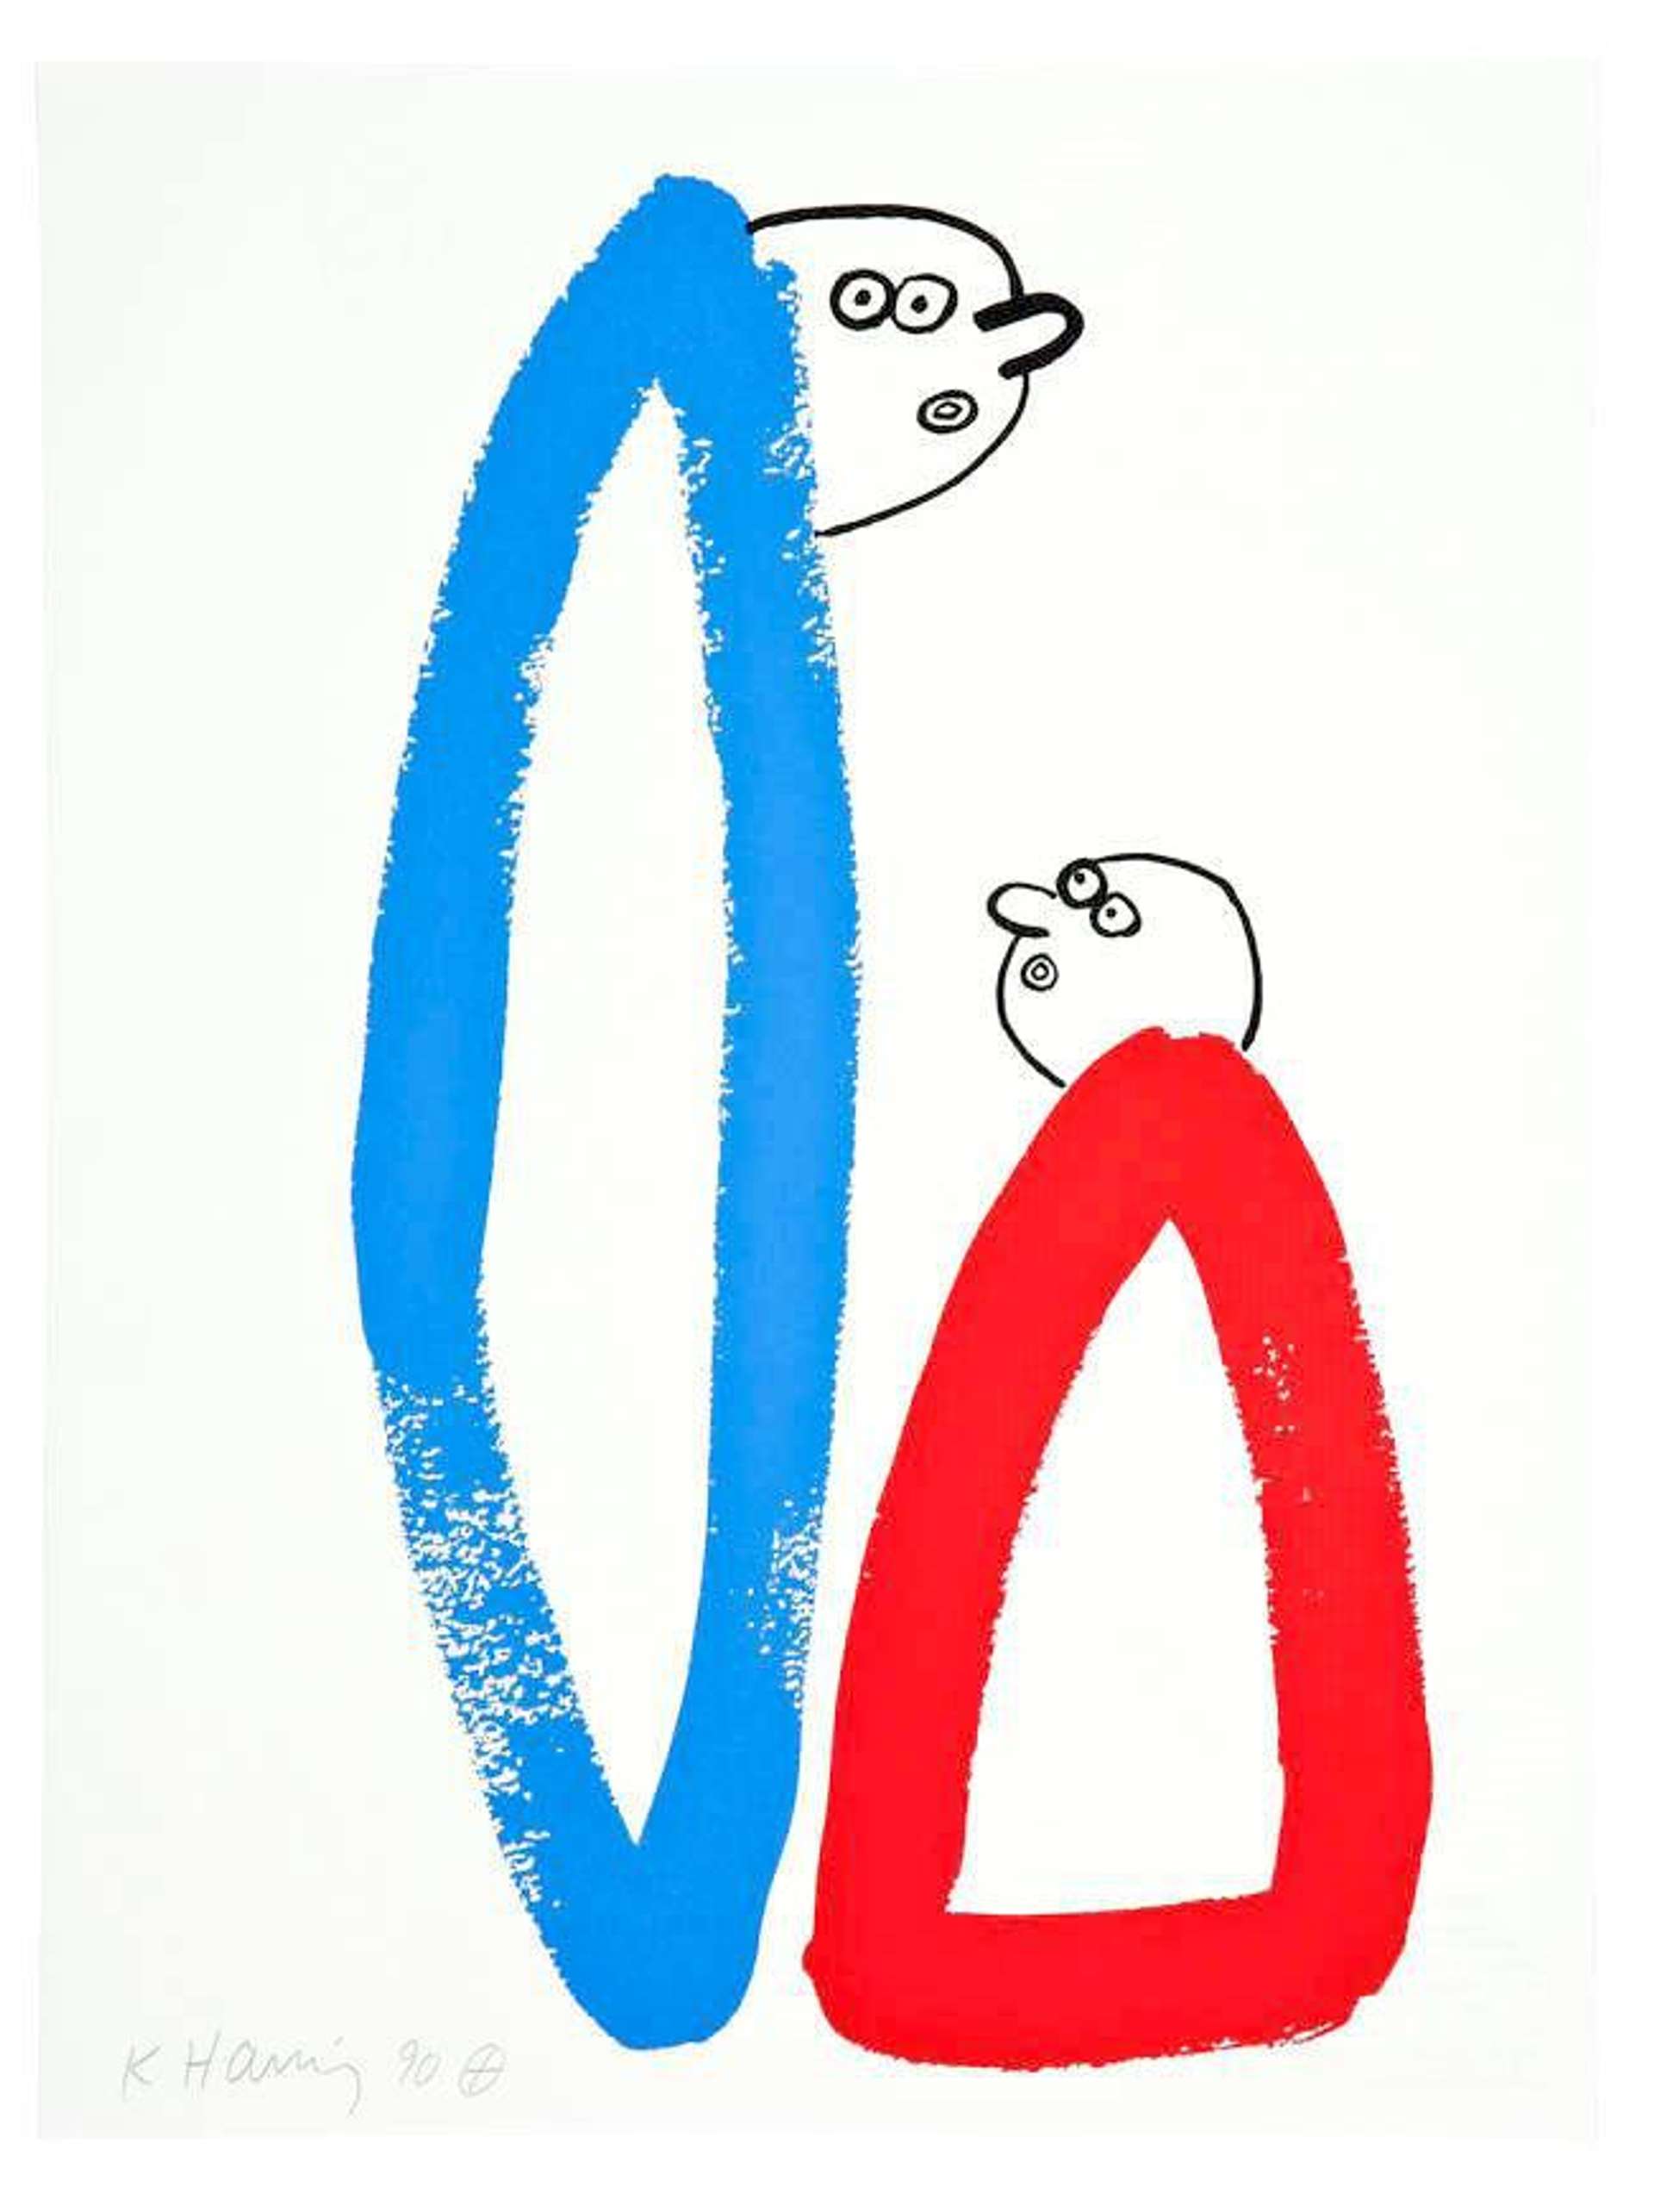 Keith Haring: The Story Of Red And Blue 14 - Signed Print